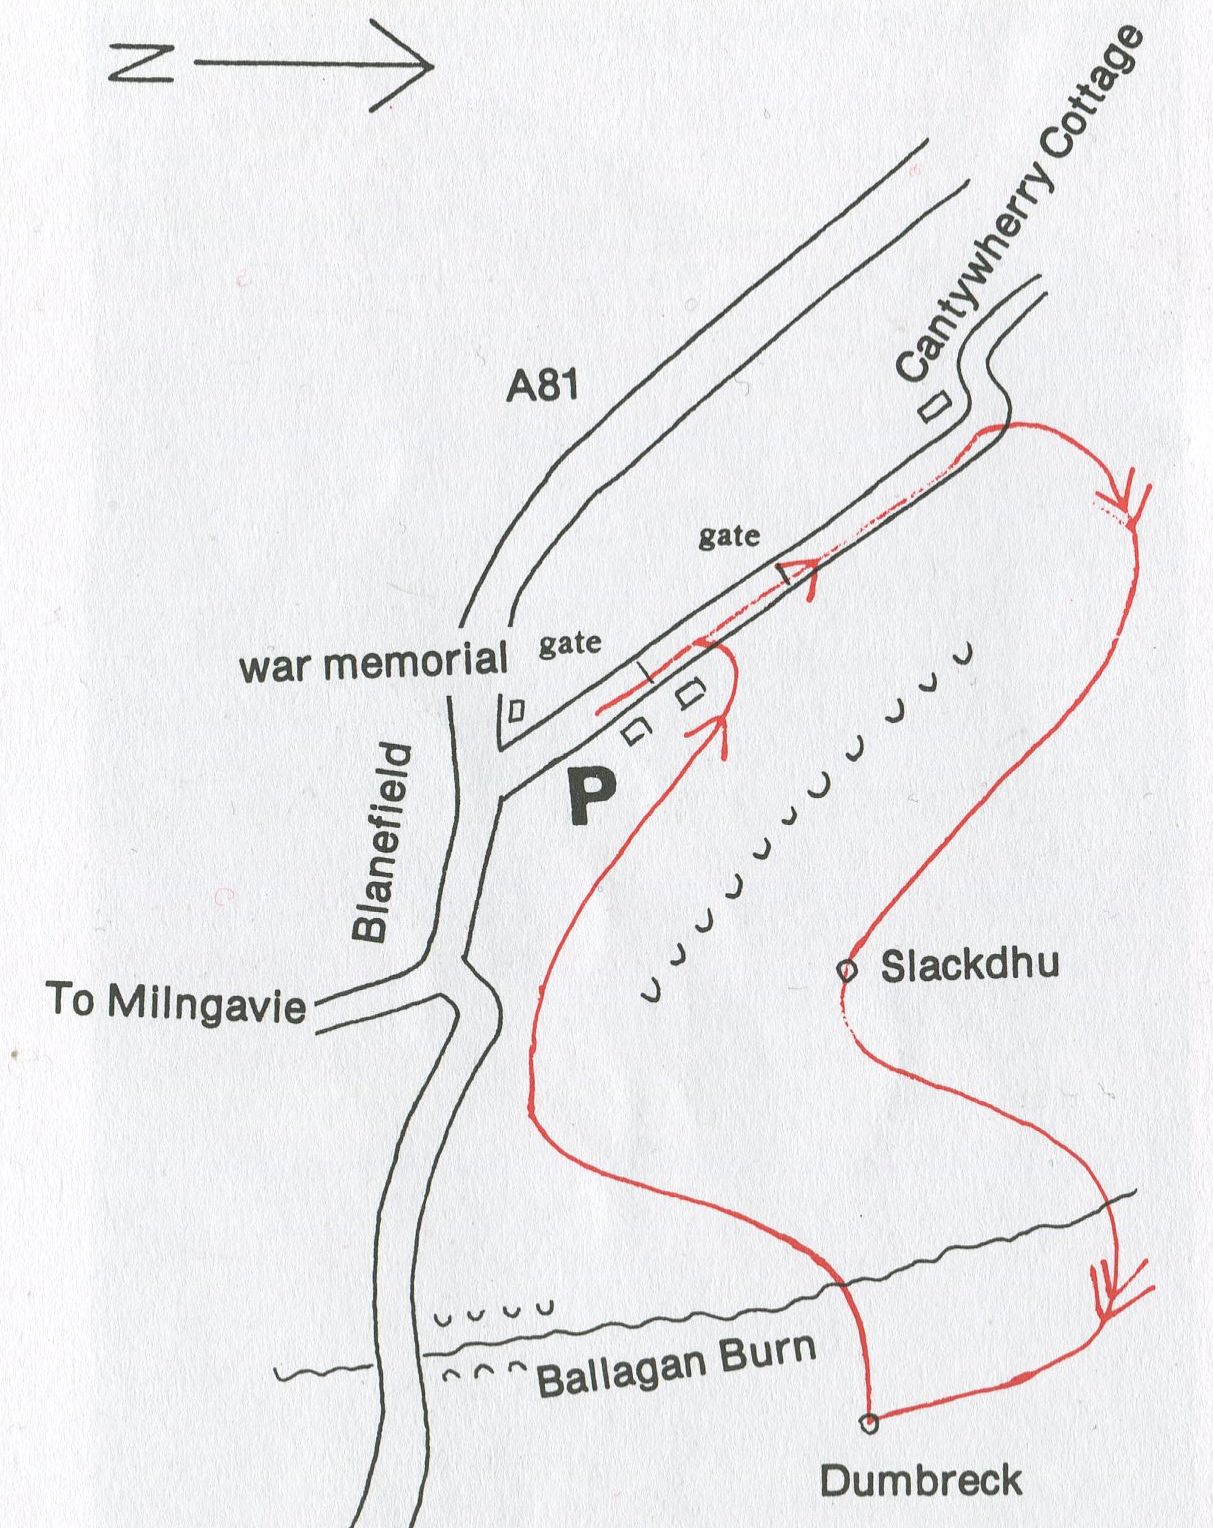 Route Map of Slackdhu and Dumbreck on the Campsie Fells above Blanefield and Strathblane